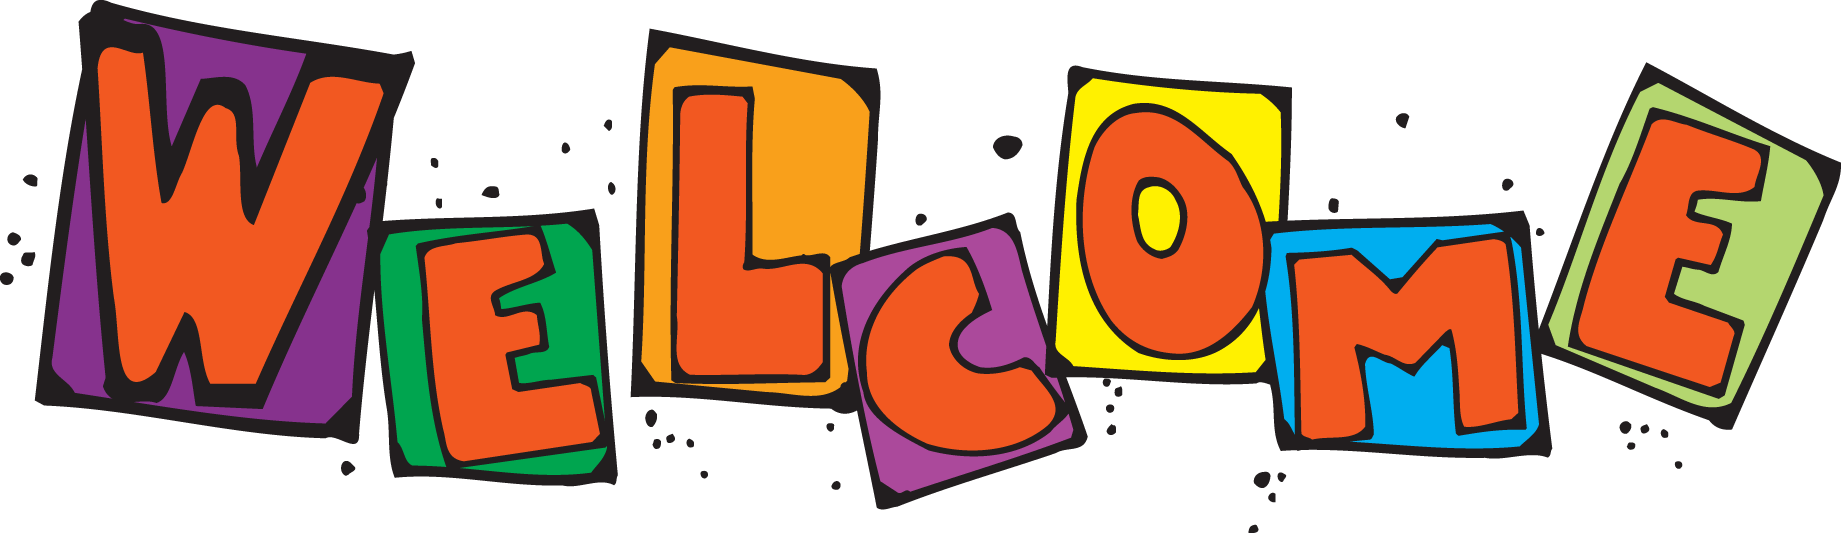 Welcome to preschool clipart free clipart images 2